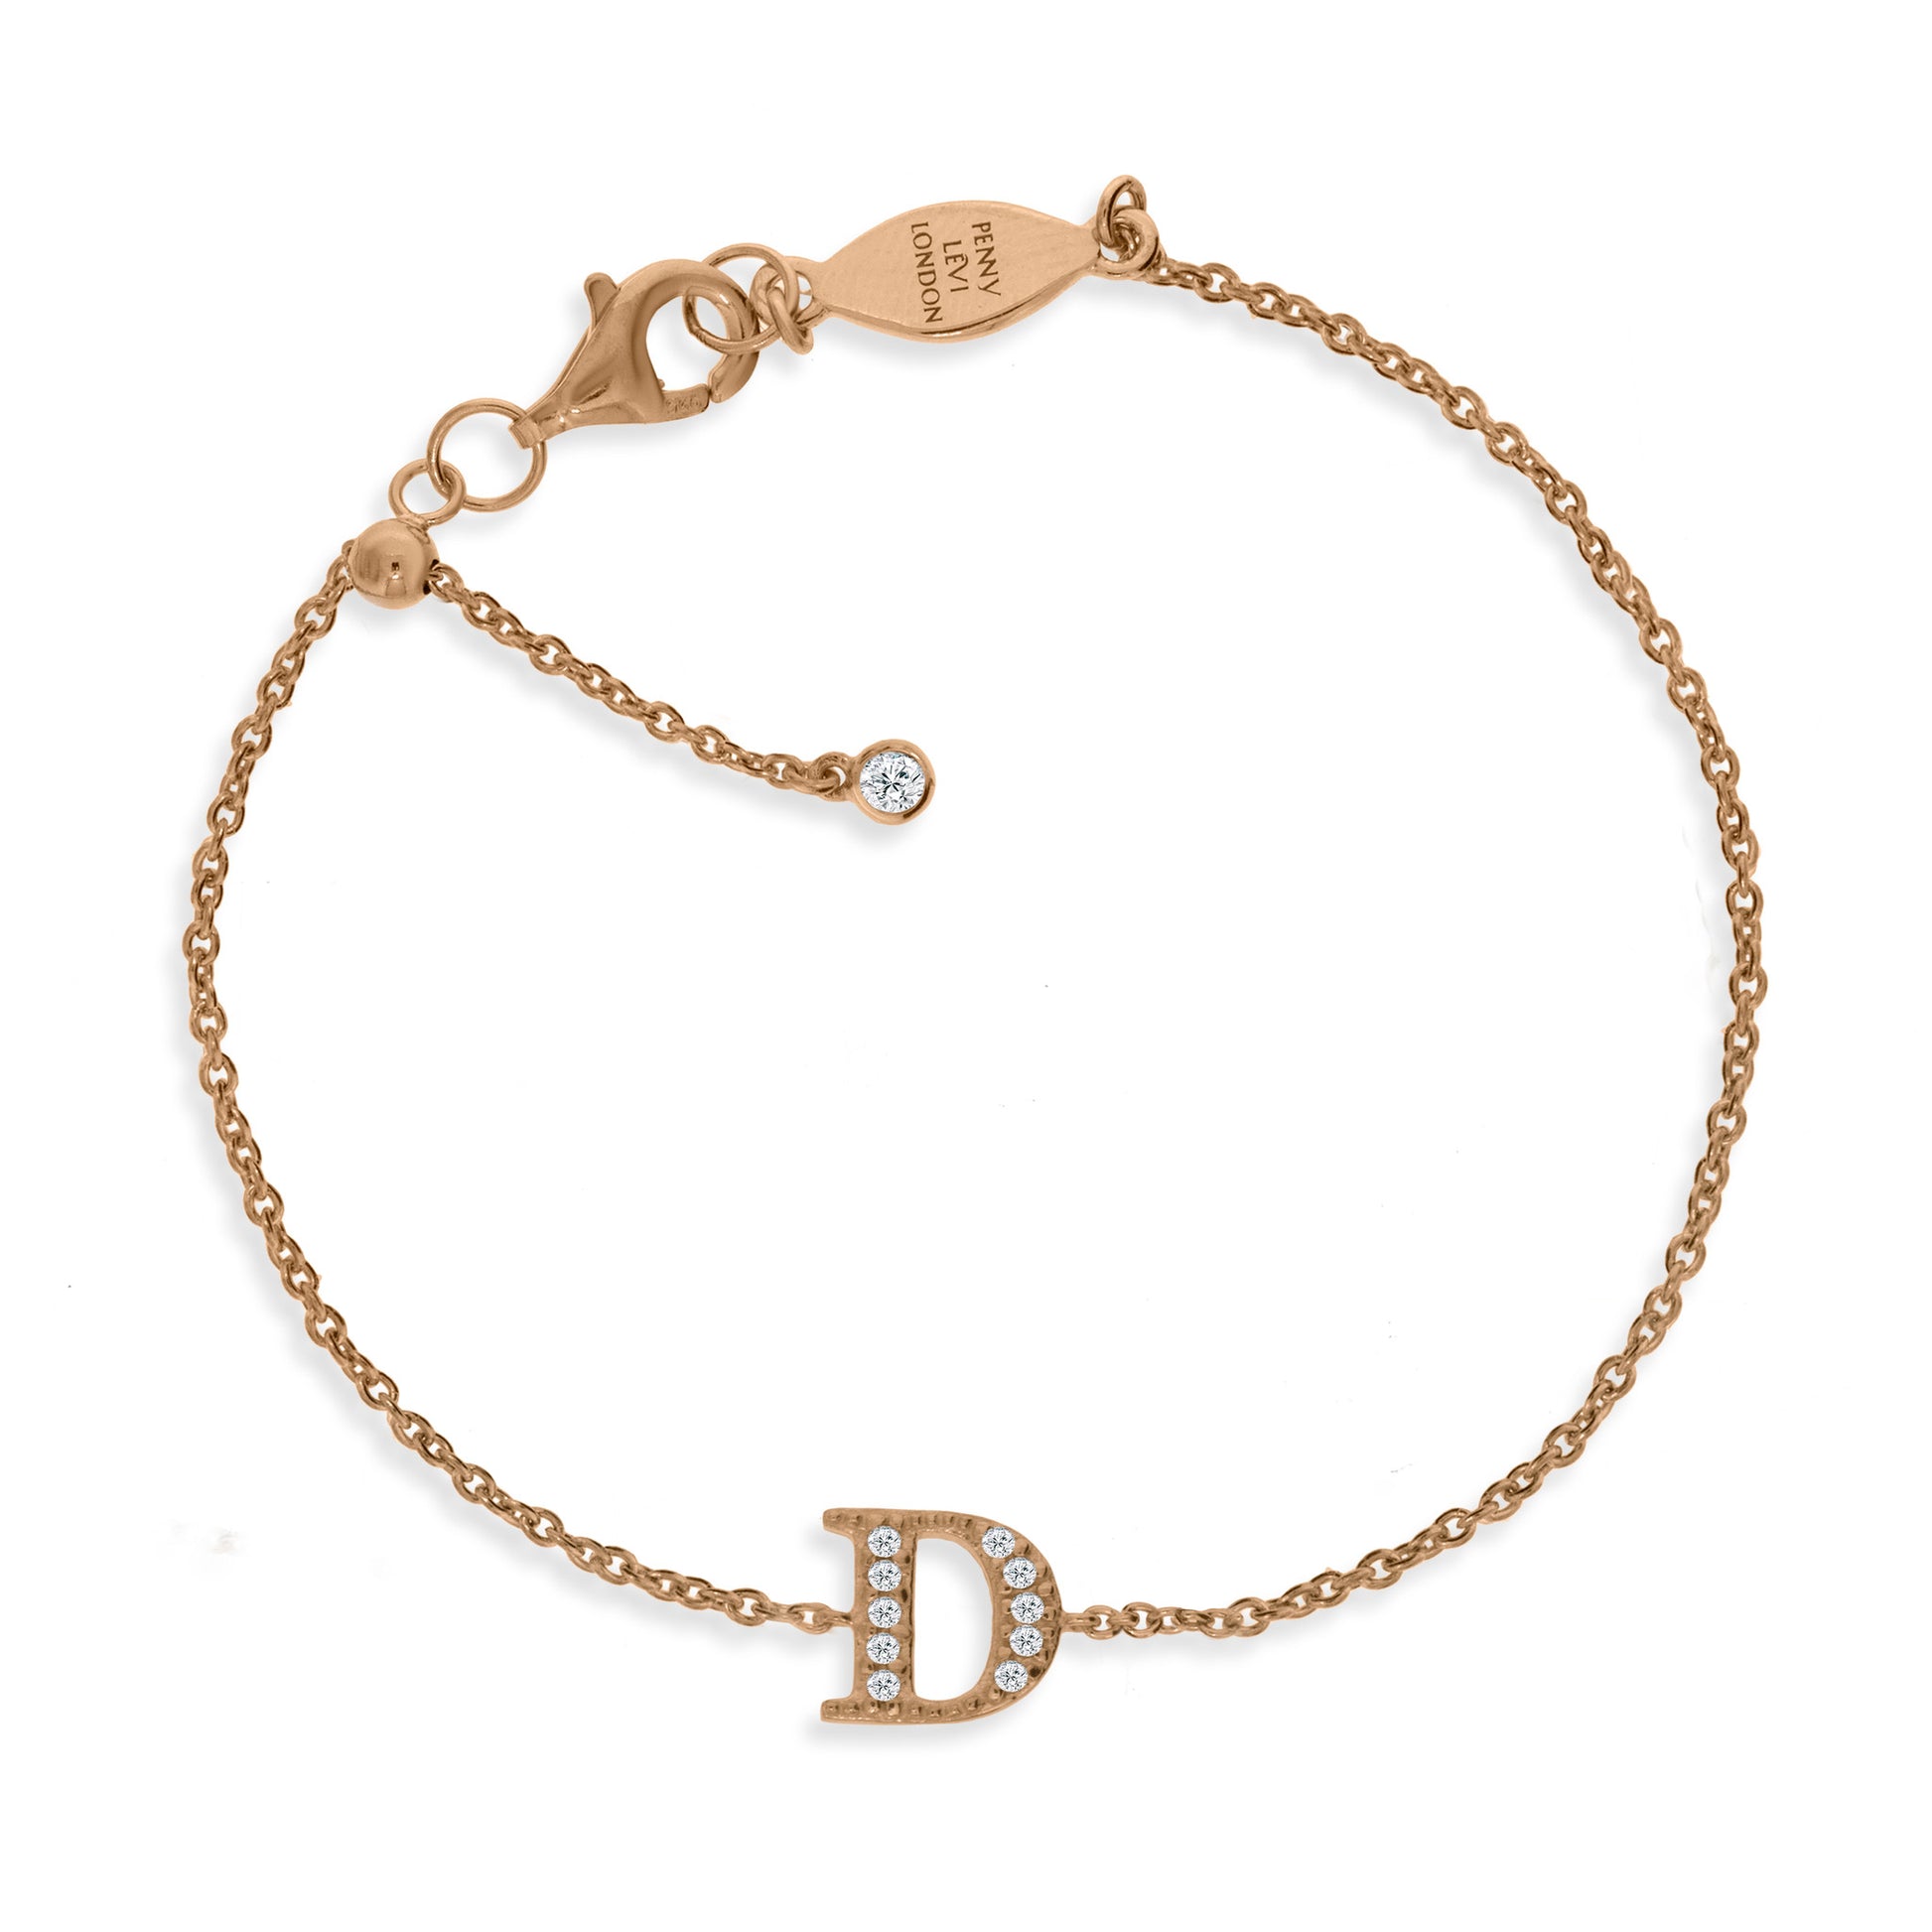 
Gold plated on silver chain initial bracelet with CZ and adjustable sliding length adapter

